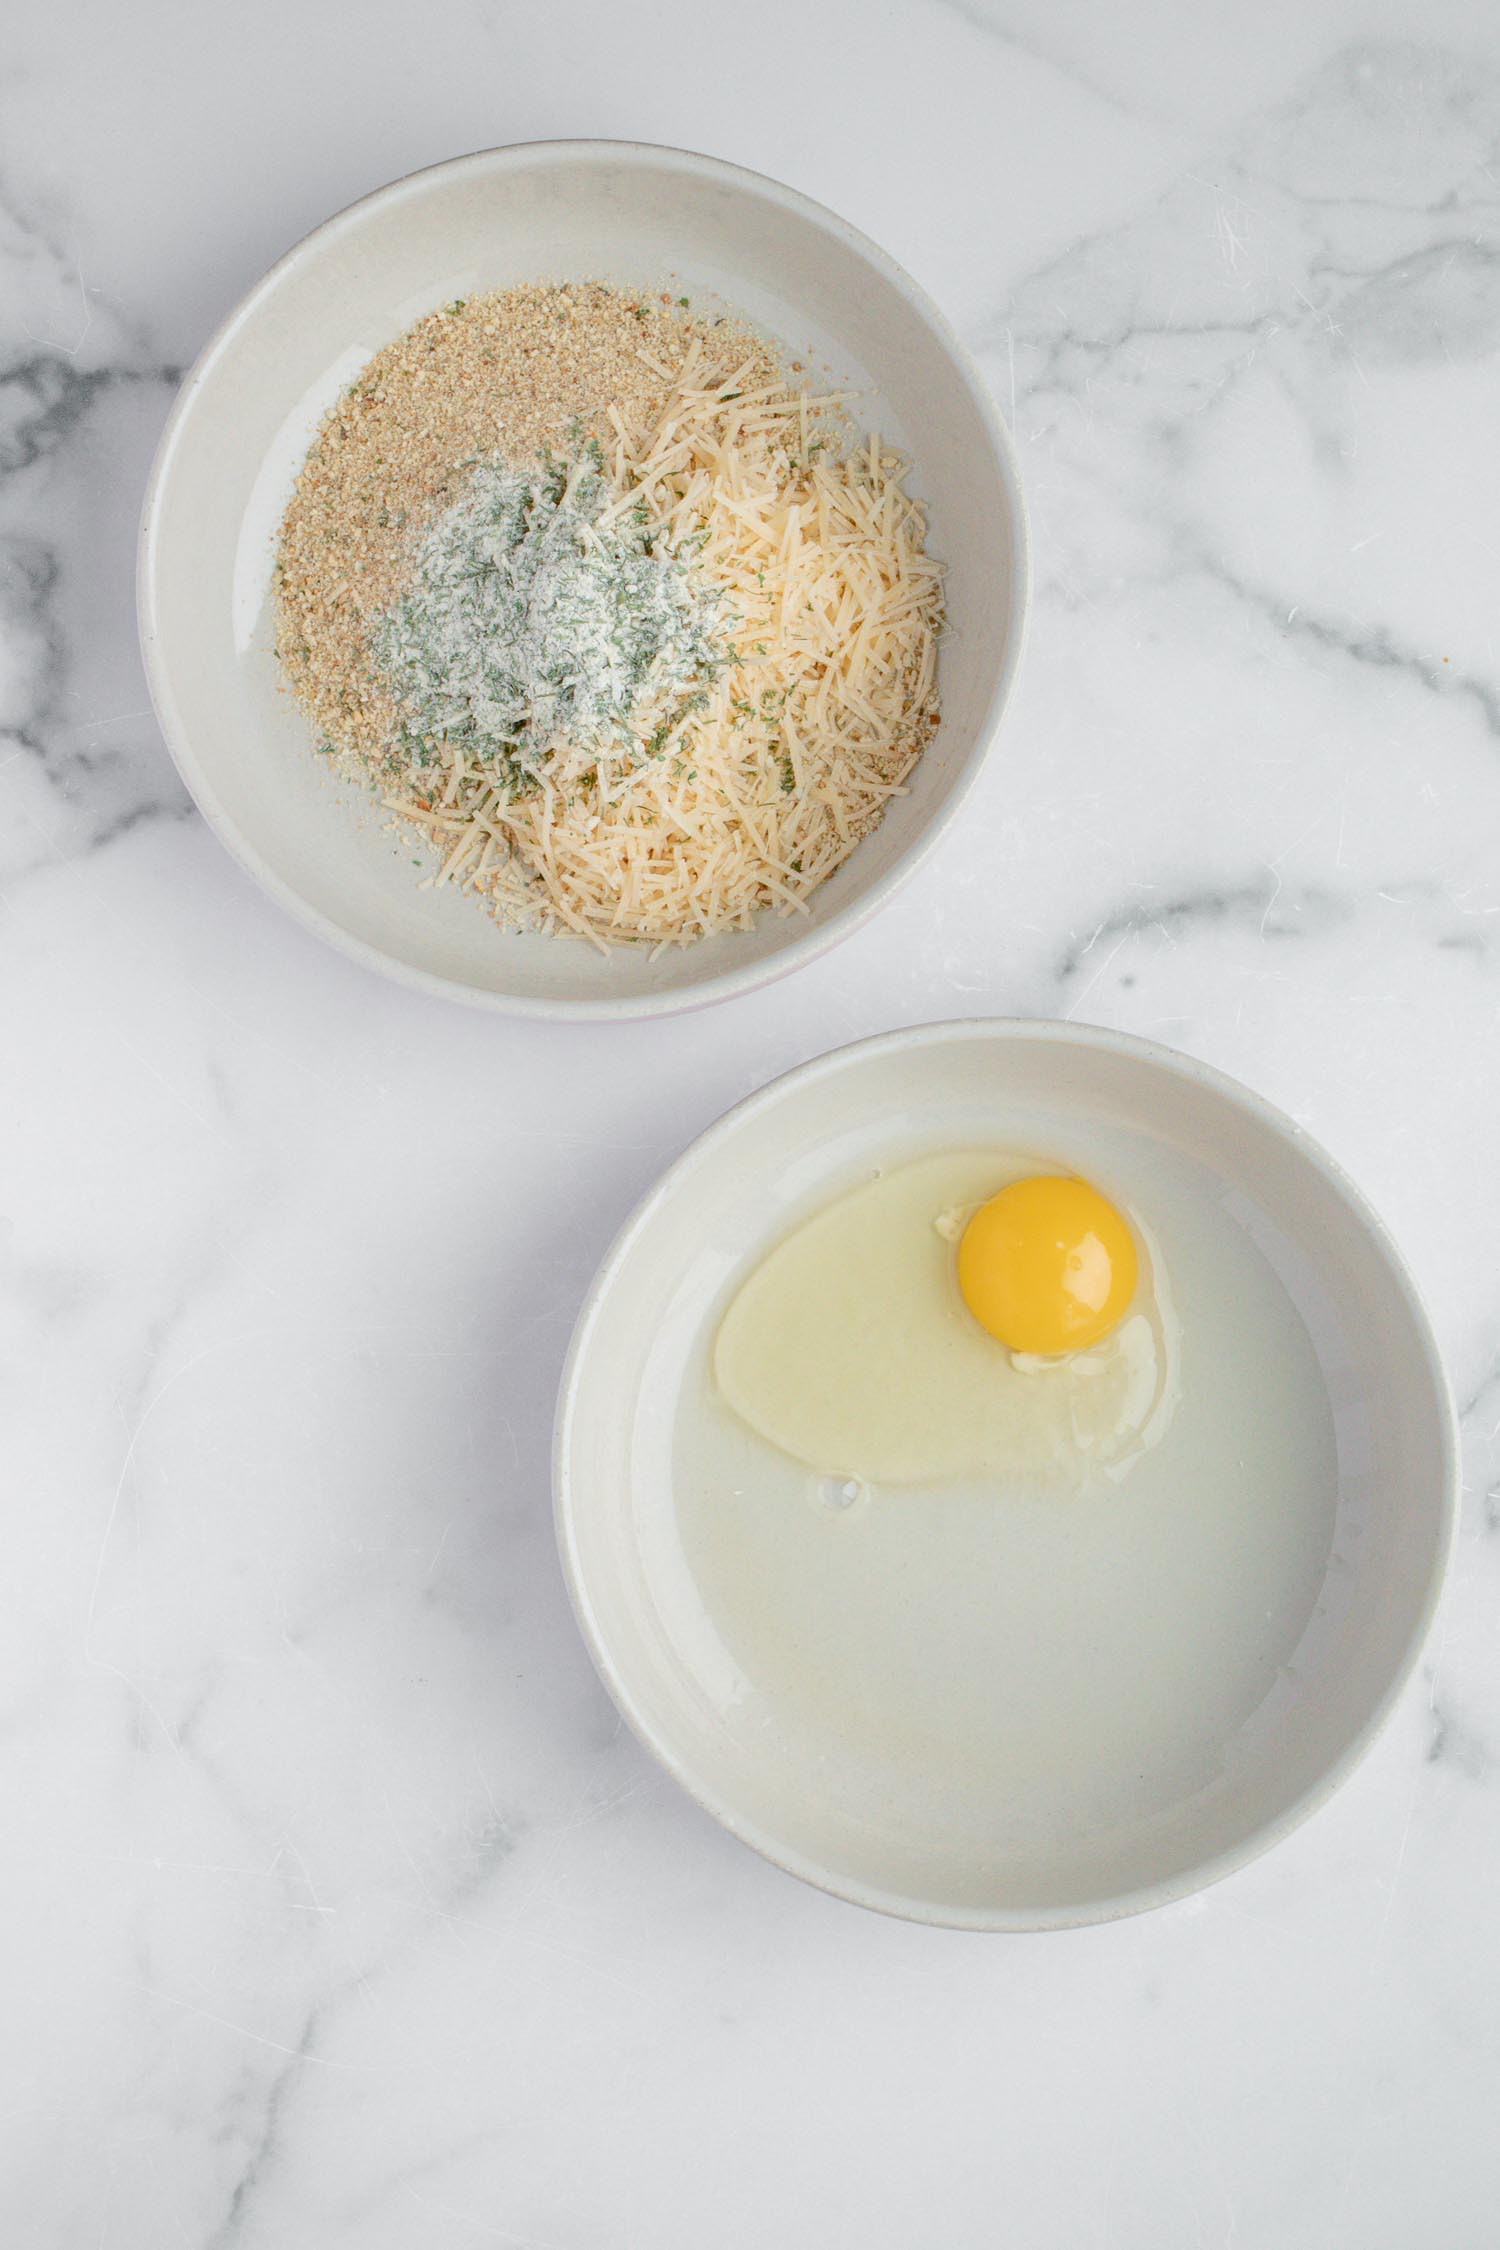 Two white bowls with an raw cracked egg in one and in the other is spices and cheese.